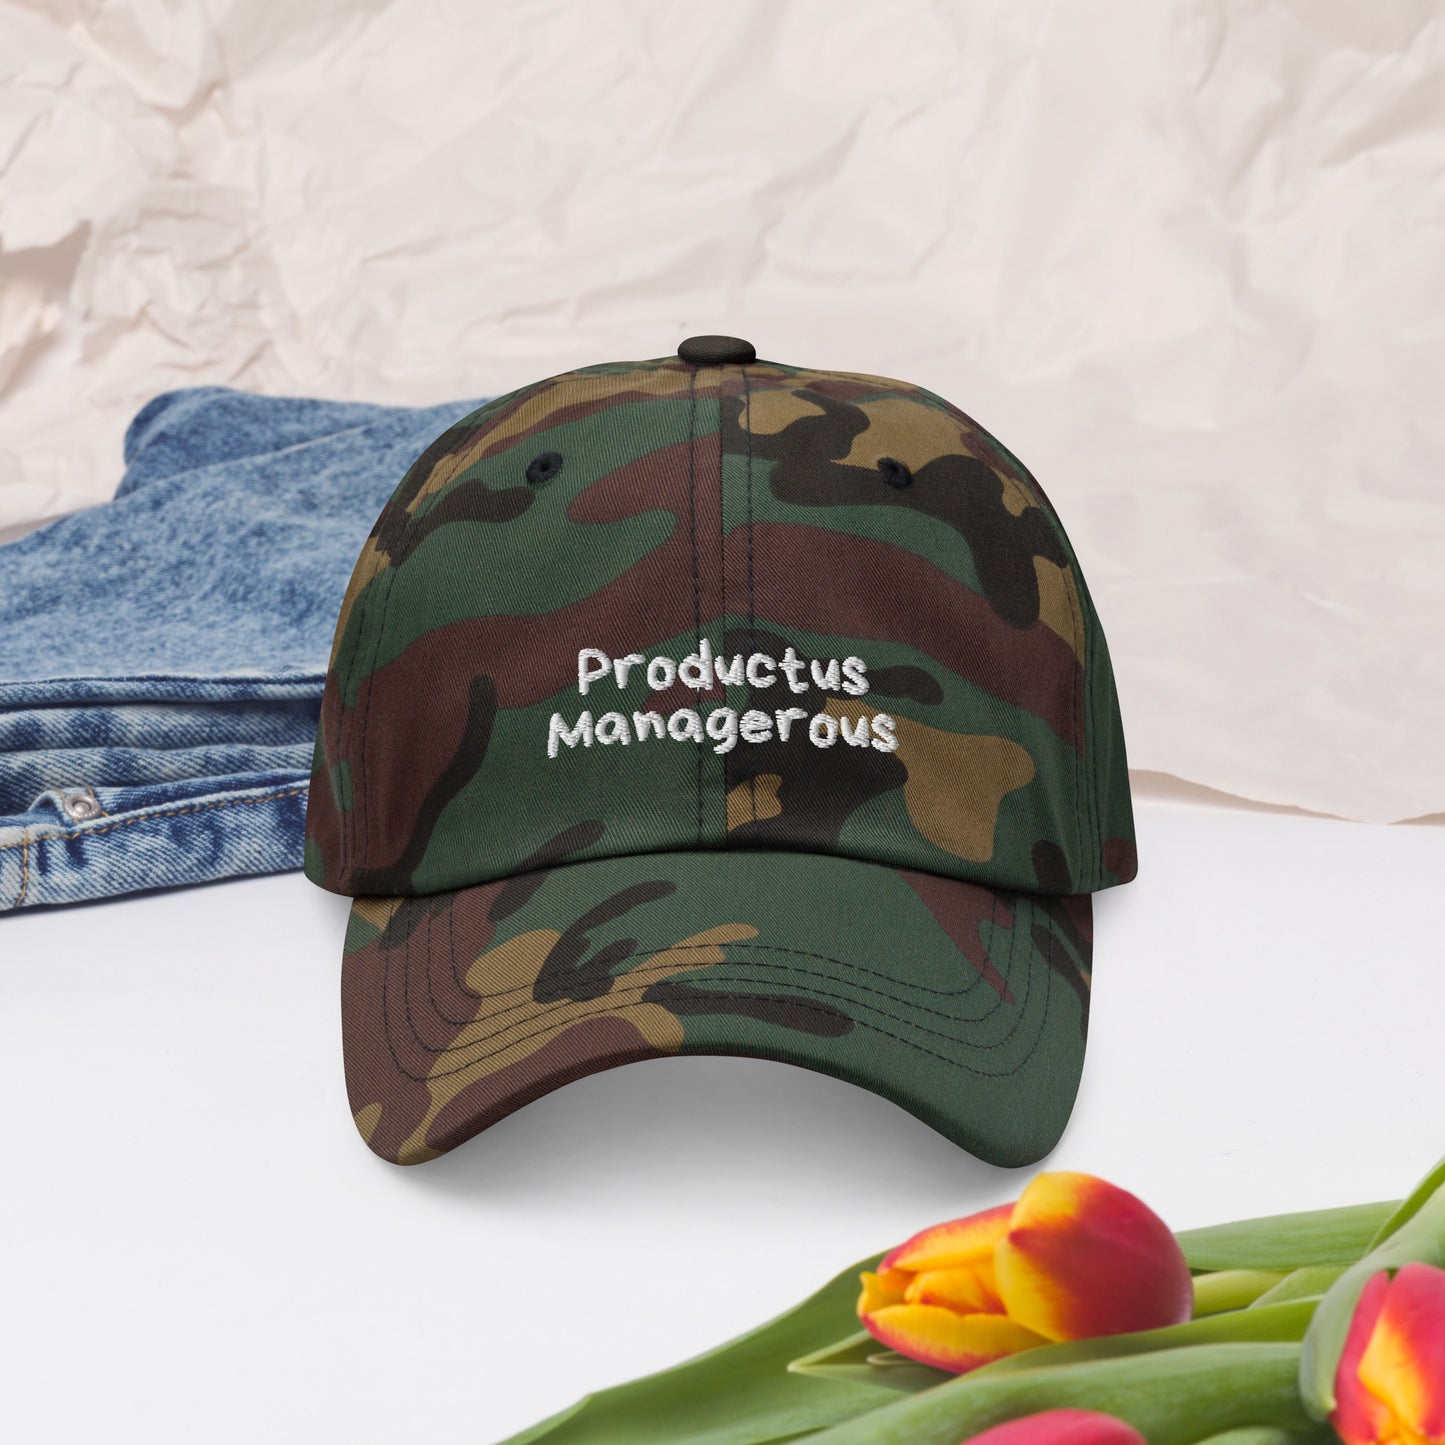 Productus Managerous Adjustable Hat